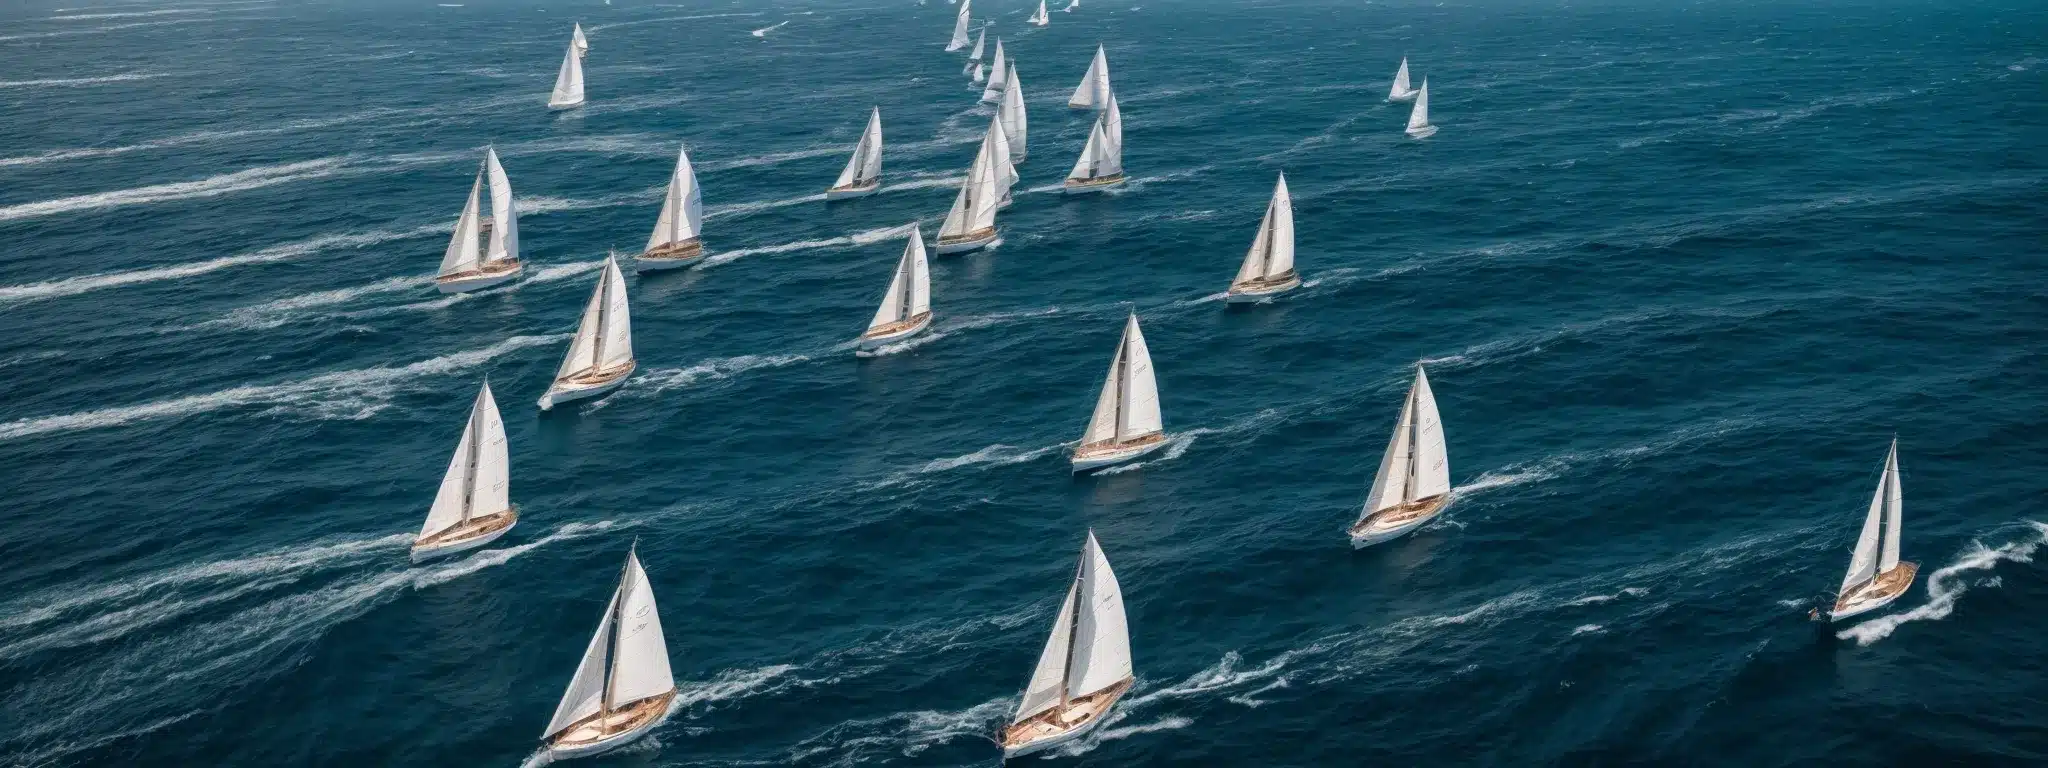 A Vibrant Fleet Of Sailboats Racing Across A Wide, Sunlit Ocean, Navigating Their Unique Paths Among The Waves.